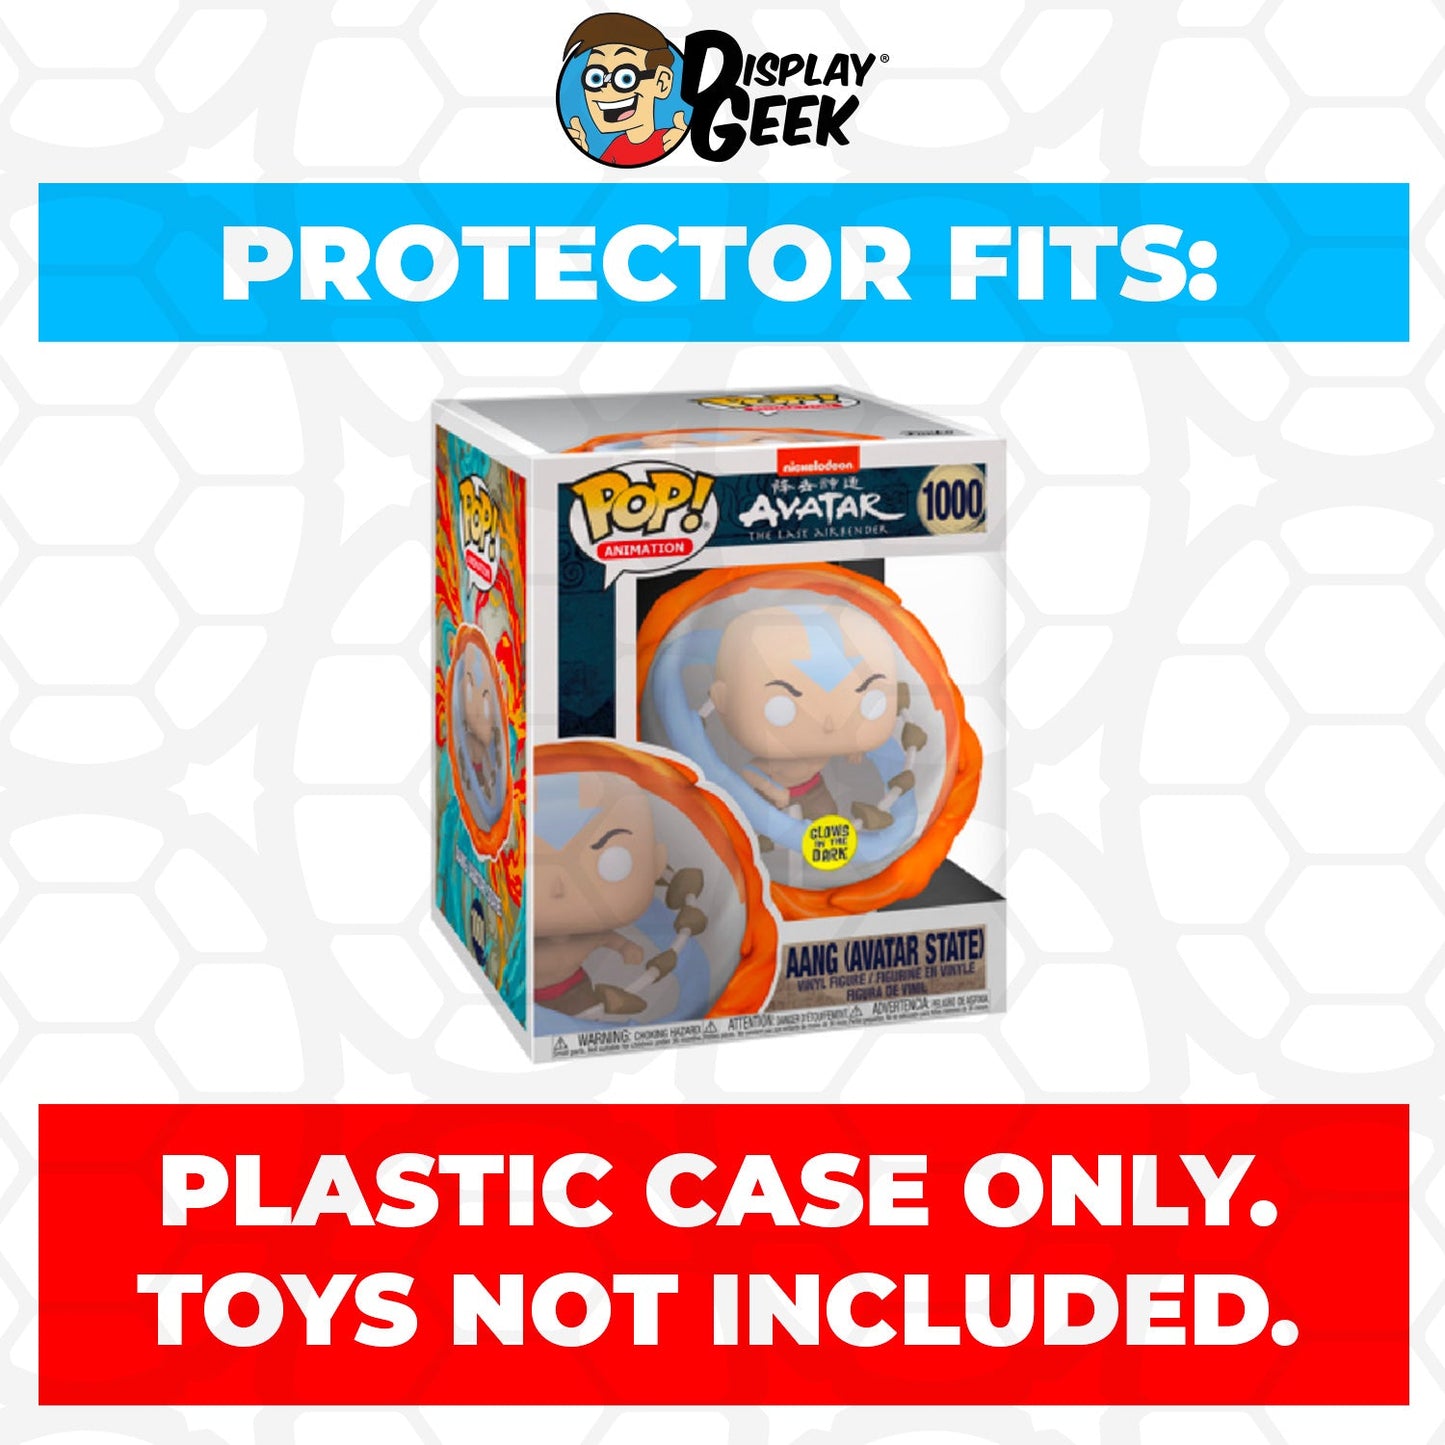 Pop Protector for 6 inch Aang Avatar State #1000 Super Funko Pop - PPG Pop Protector Guide Search Created by Display Geek